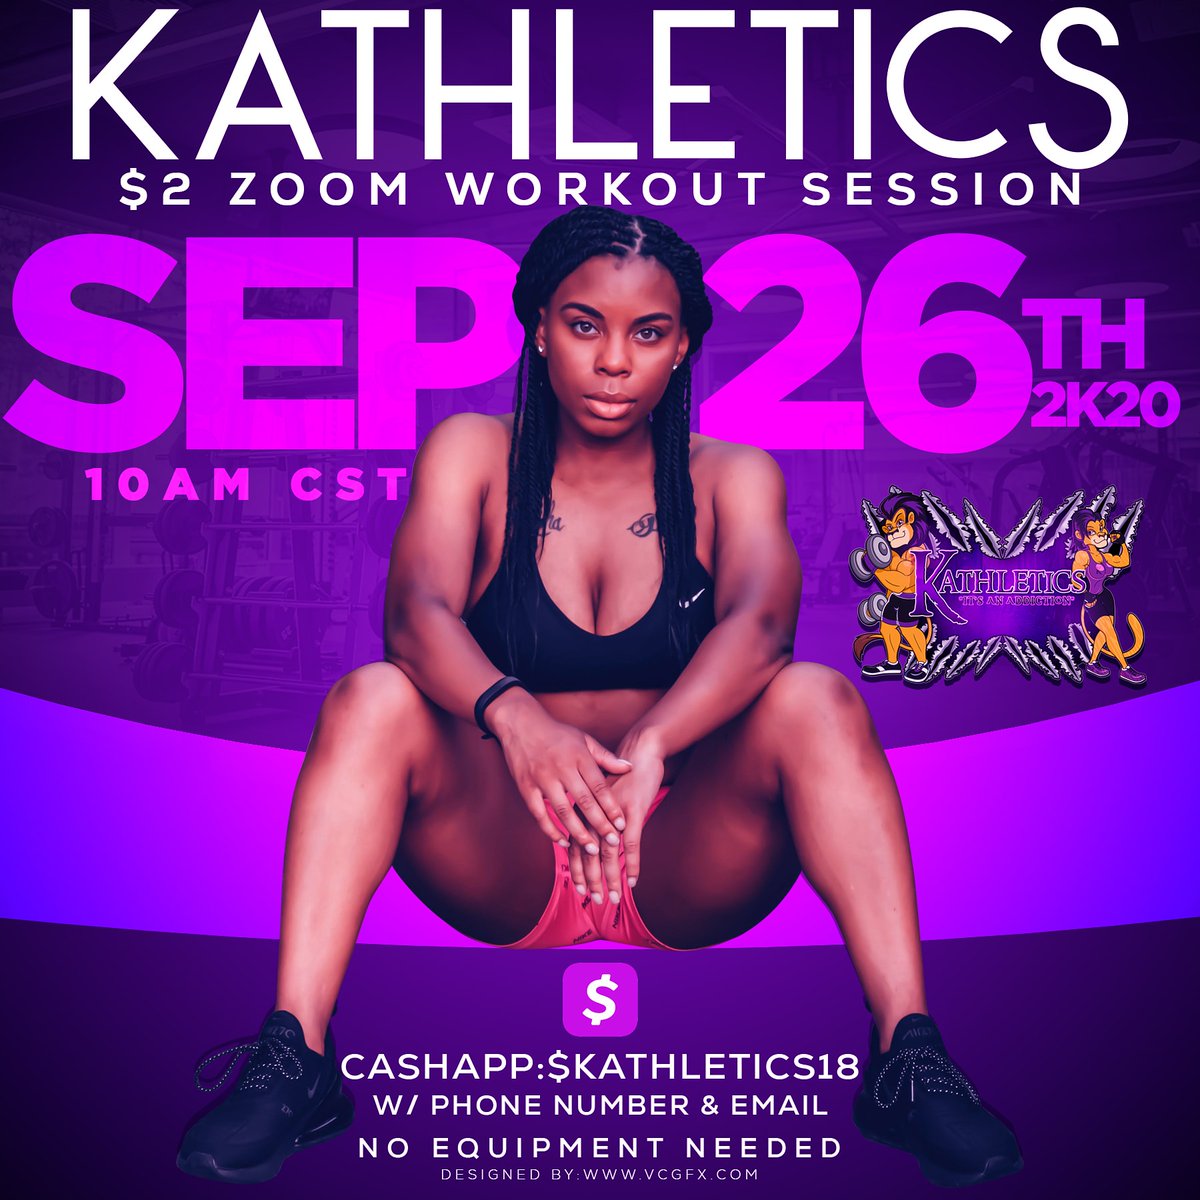 Get your Body Snatched for $2!!🏋🏾‍♀️ Join Kathletics via Zoom Saturday, September 26th at 10:00am CST. 💪🏾 NO EQUIPMENT NEEDED!

#Kathletics #BodyByKat #Fitness #PersonalTrainer #BlackPersonalTrainer #Exercise #workout #OnlineWorkouts